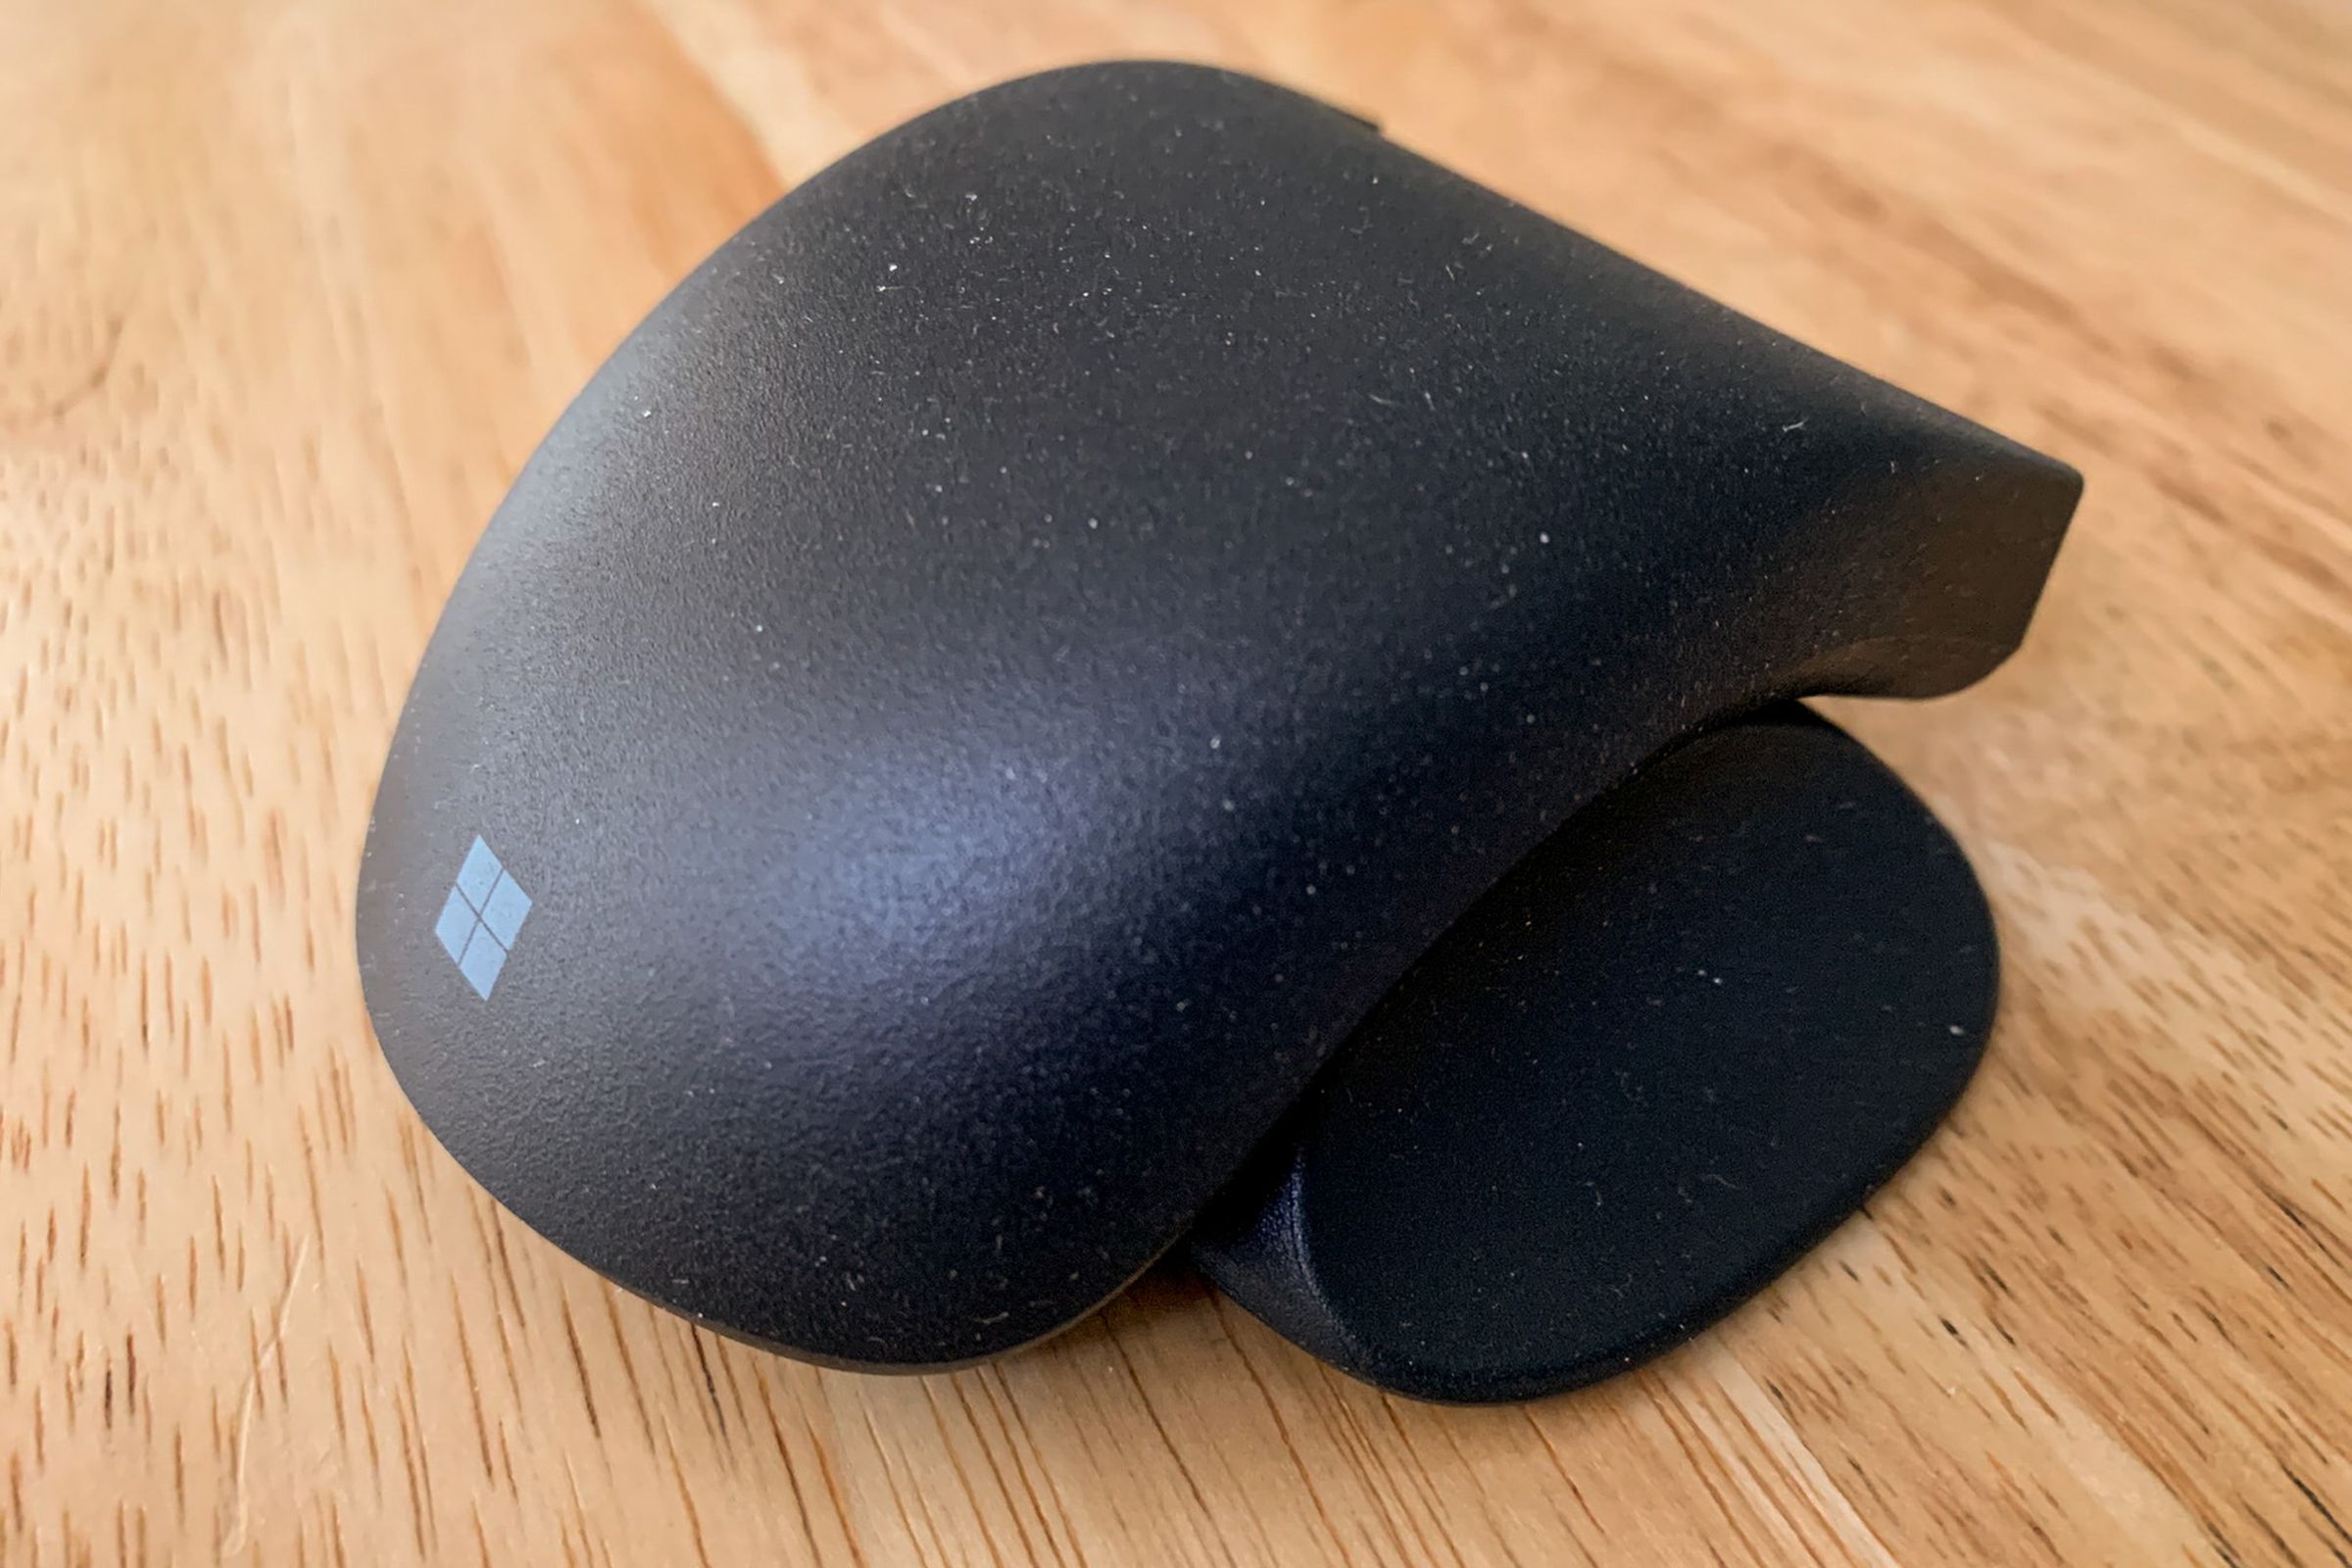 Close-up of a black adaptive mouse with thumb support.